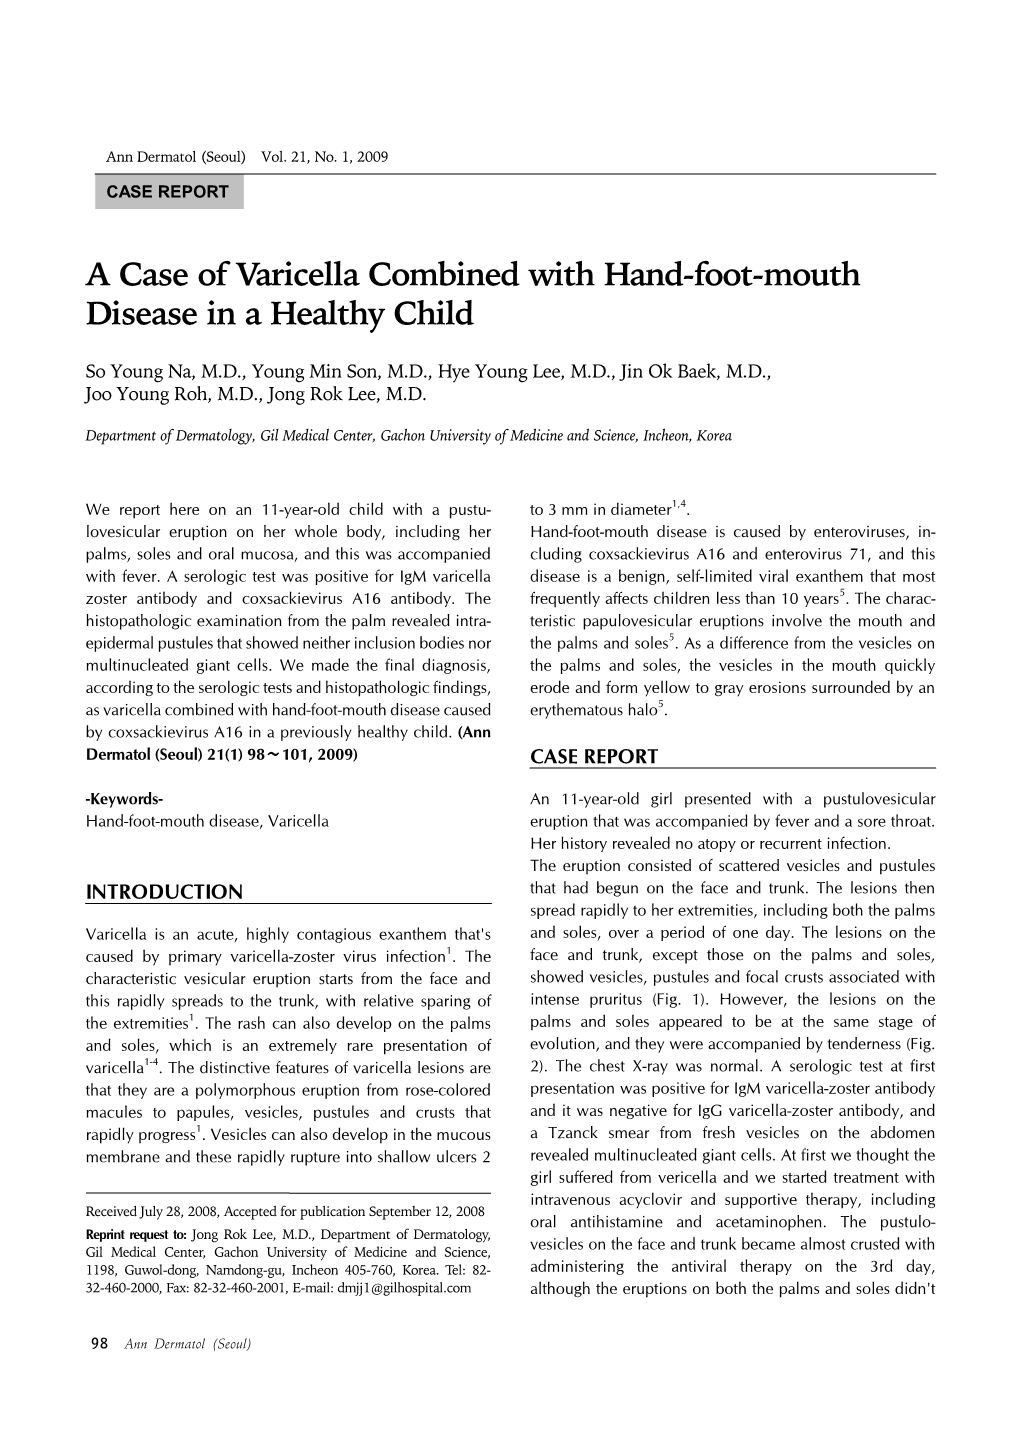 A Case of Varicella Combined with Hand-Foot-Mouth Disease in a Healthy Child